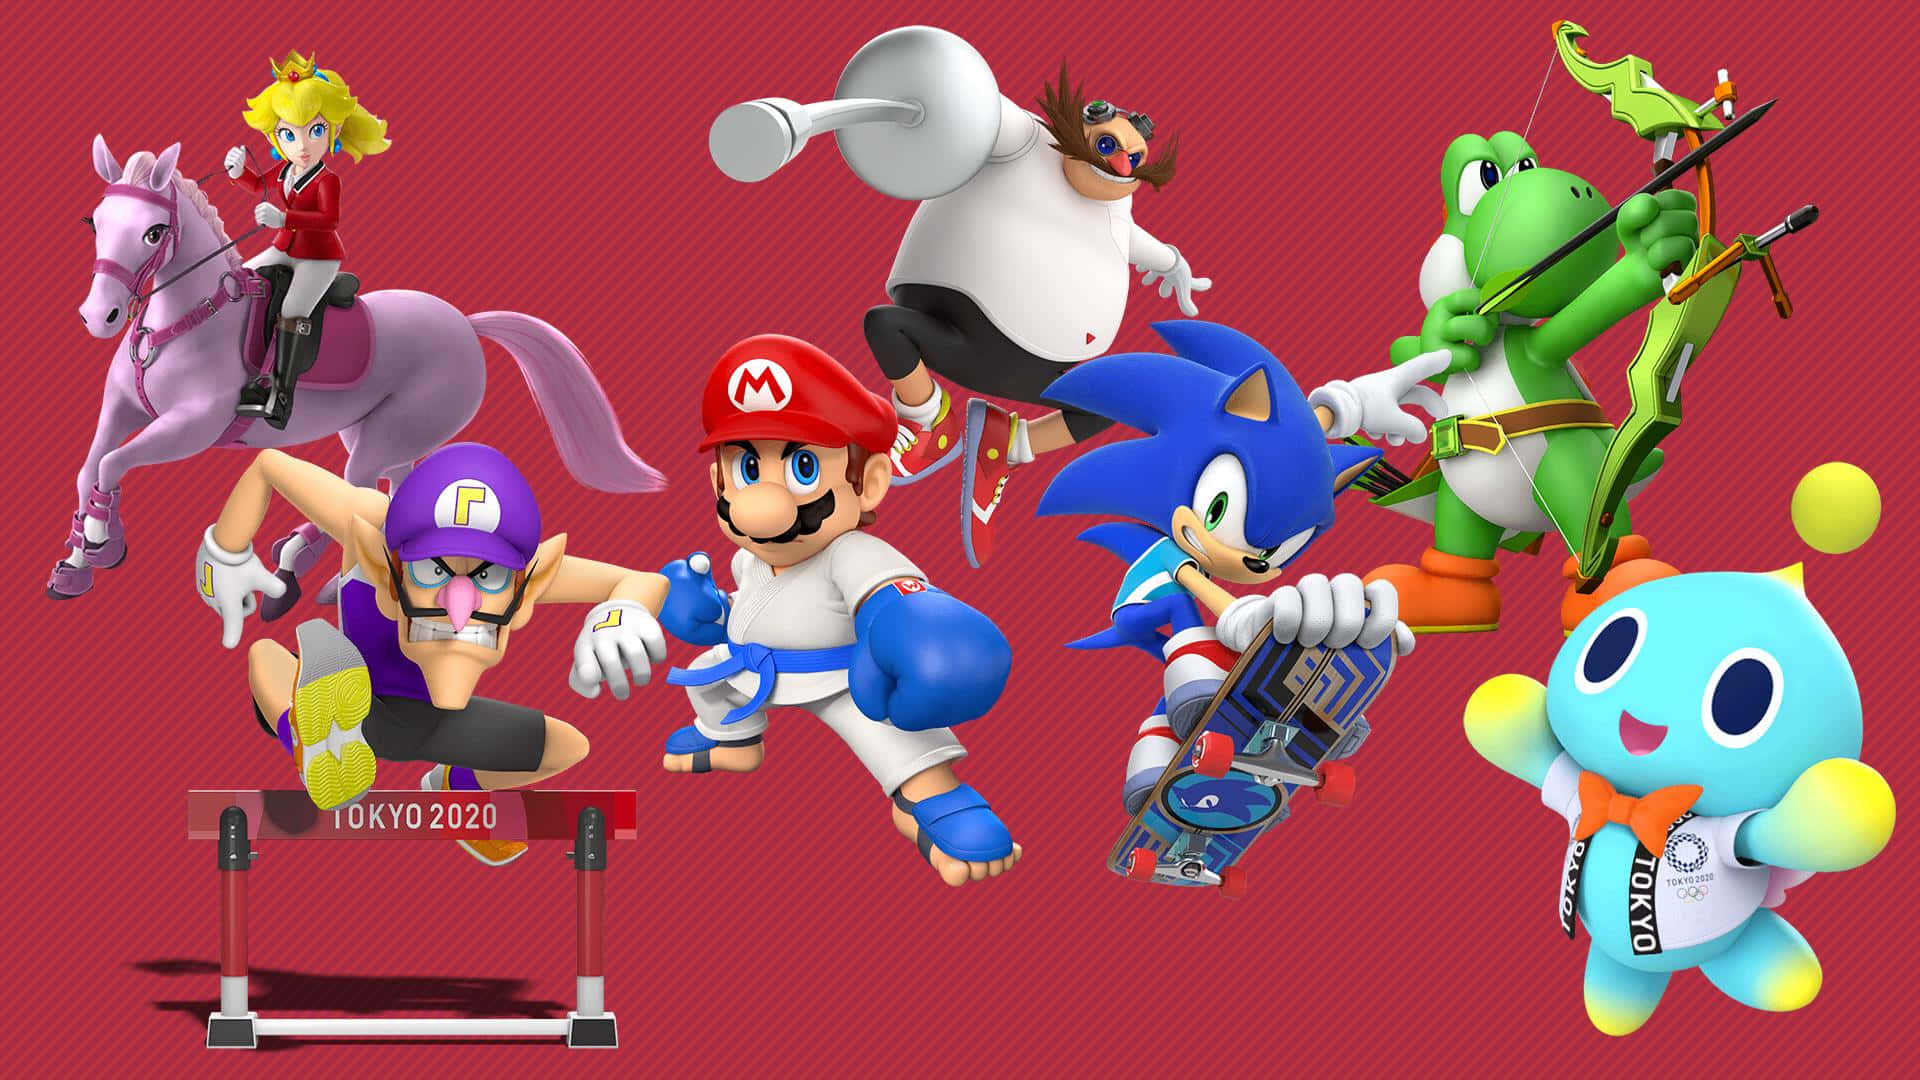 Mario And Sonic At The Olympic Games 1920 X 1080 Wallpaper Wallpaper